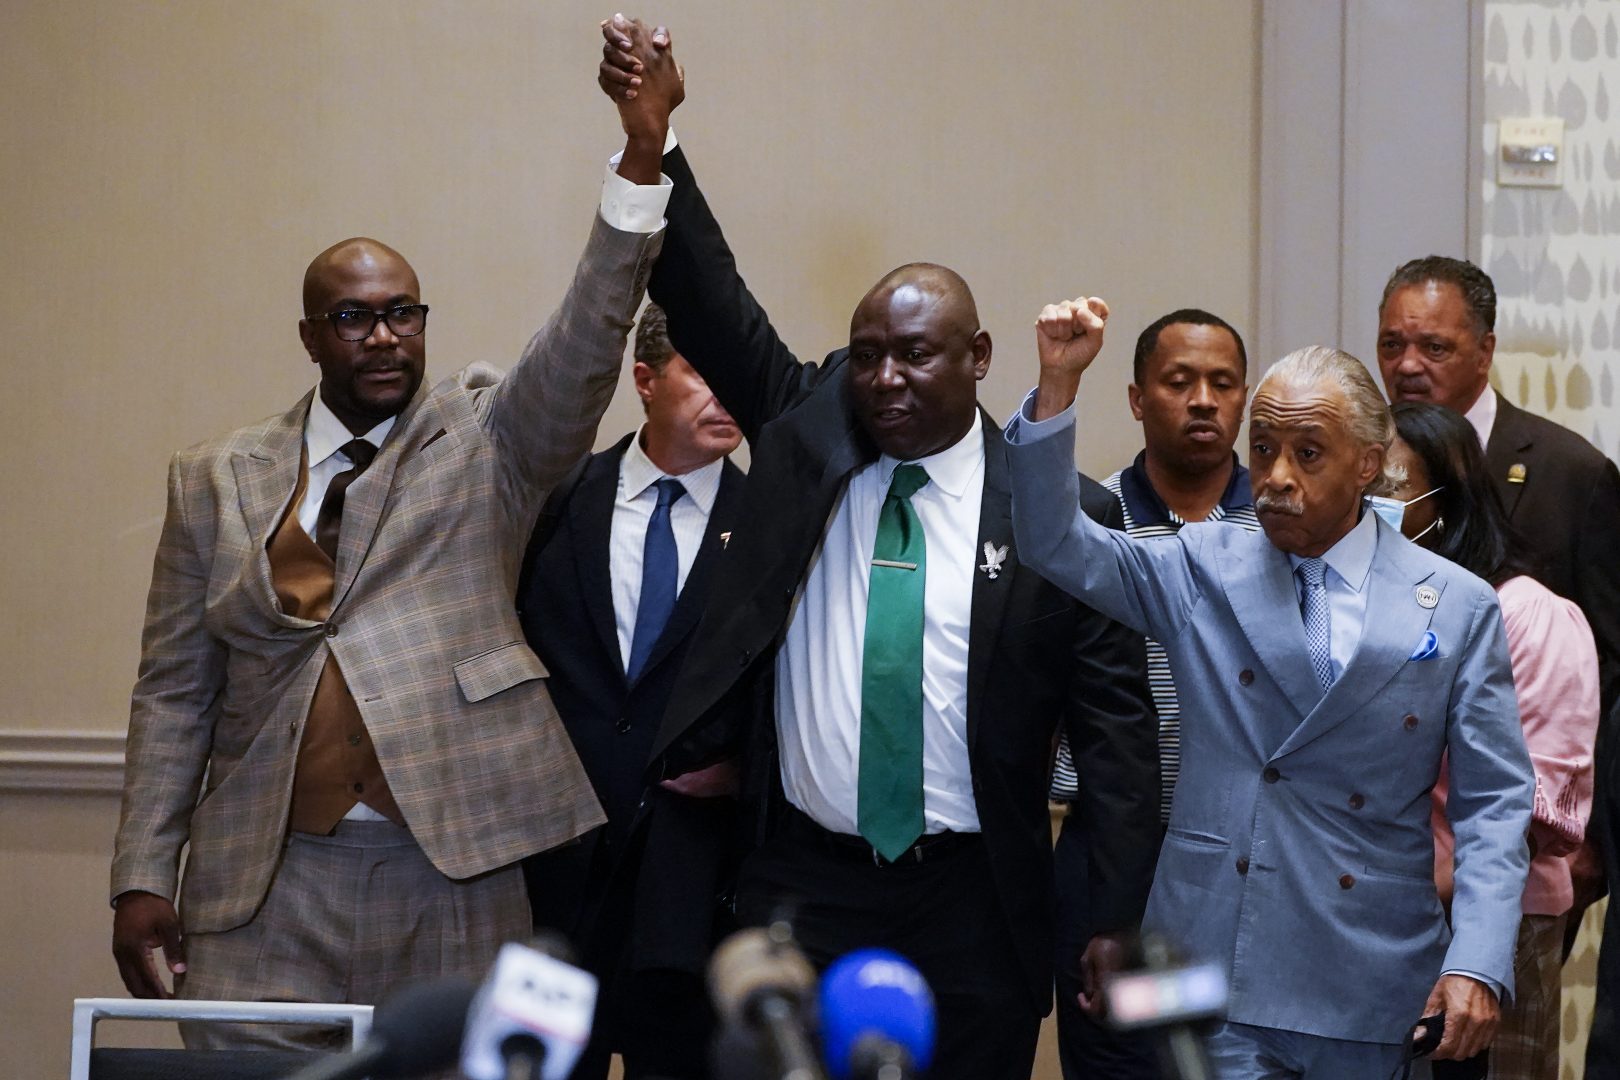 Philonise Floyd, Attorney Ben Crump and the Rev. Al Sharpton, from left, react after a guilty verdict was announced at the trial of former Minneapolis police Officer Derek Chauvin for the 2020 death of George Floyd, Tuesday, April 20, 2021, in Minneapolis, Minn. Former Minneapolis police Officer Derek Chauvin has been convicted of murder and manslaughter in the death of Floyd.